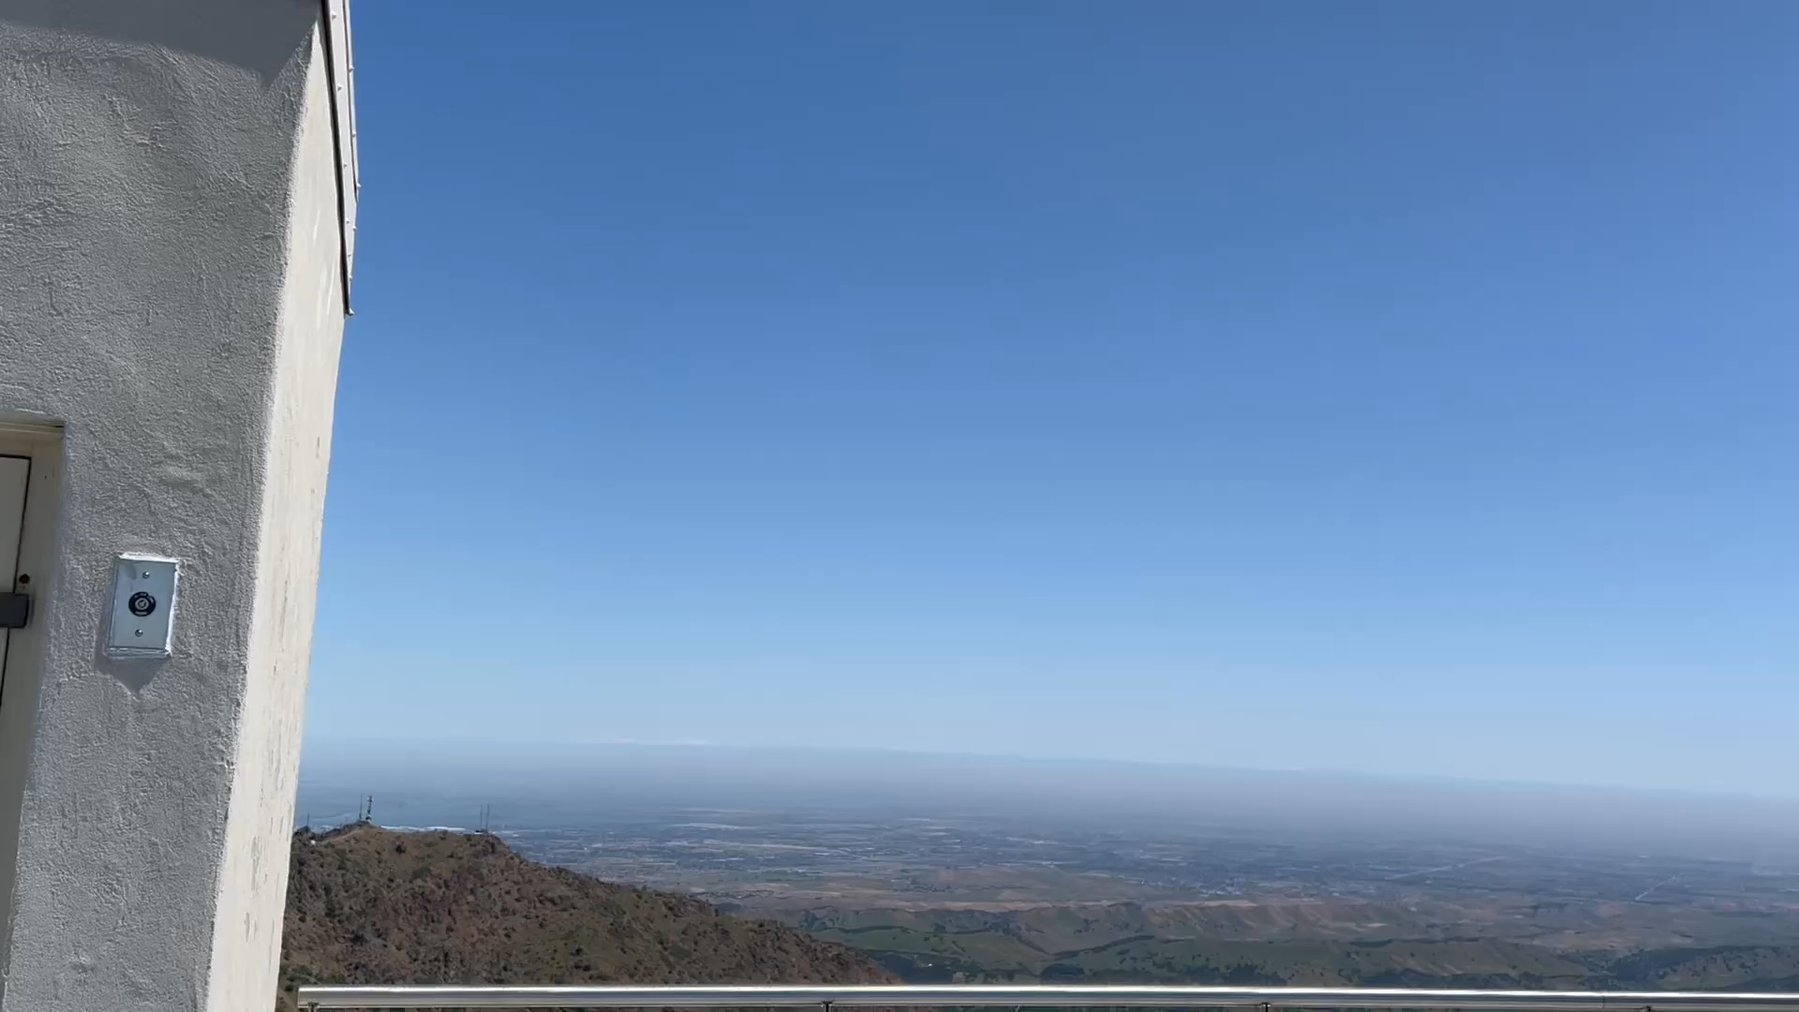 360 view from the summit viewing platform.